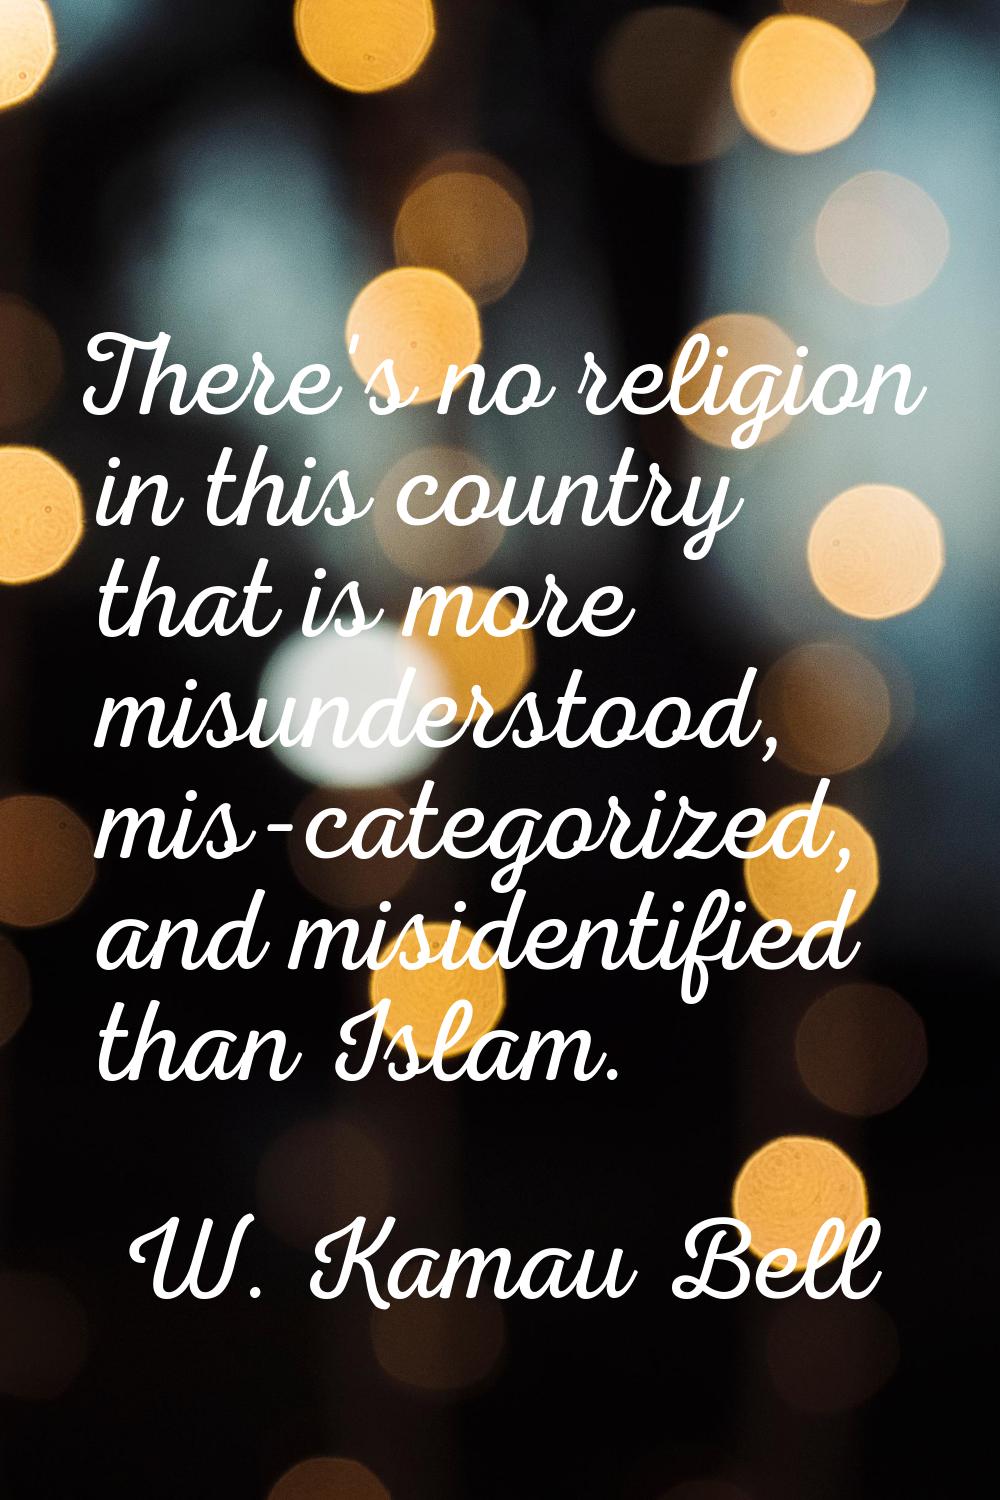 There's no religion in this country that is more misunderstood, mis-categorized, and misidentified 